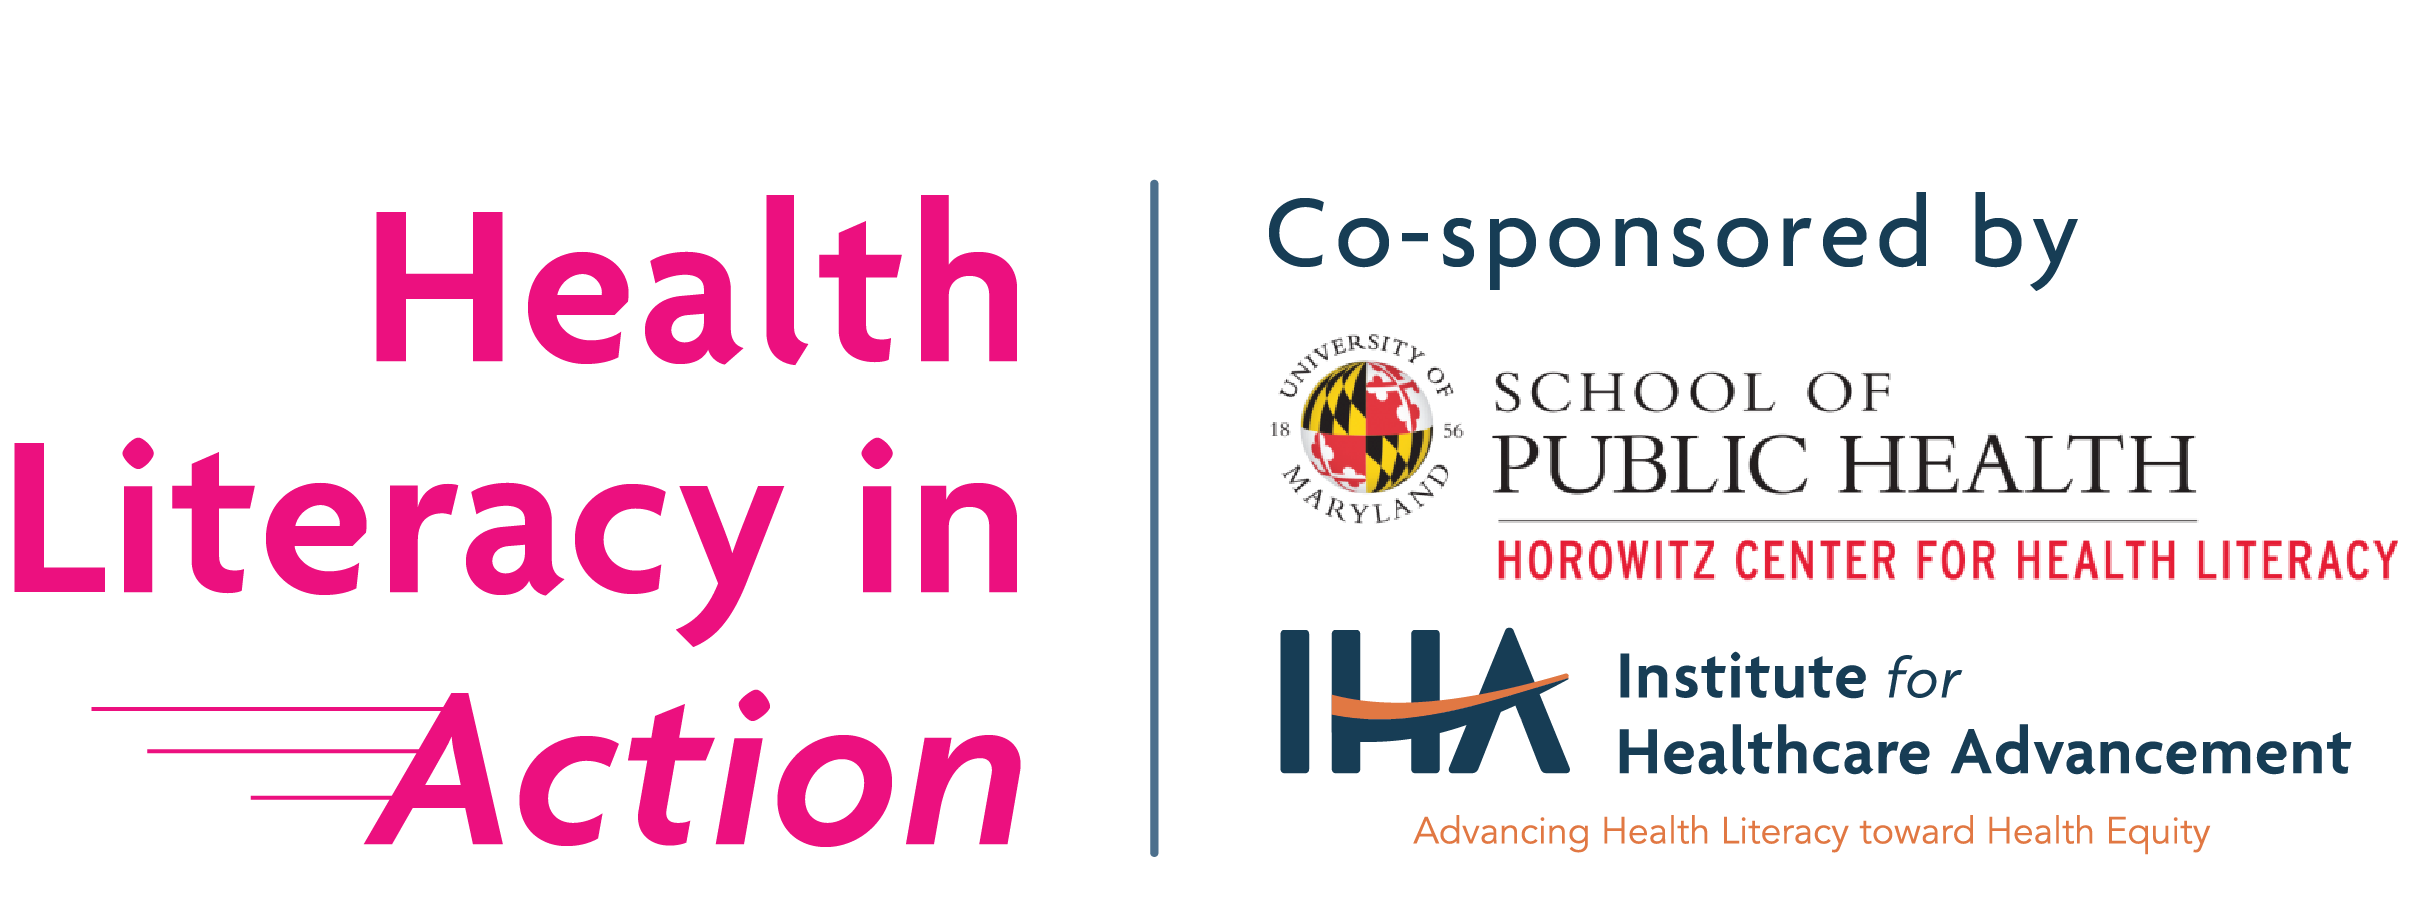 Health literacy in action conference logo